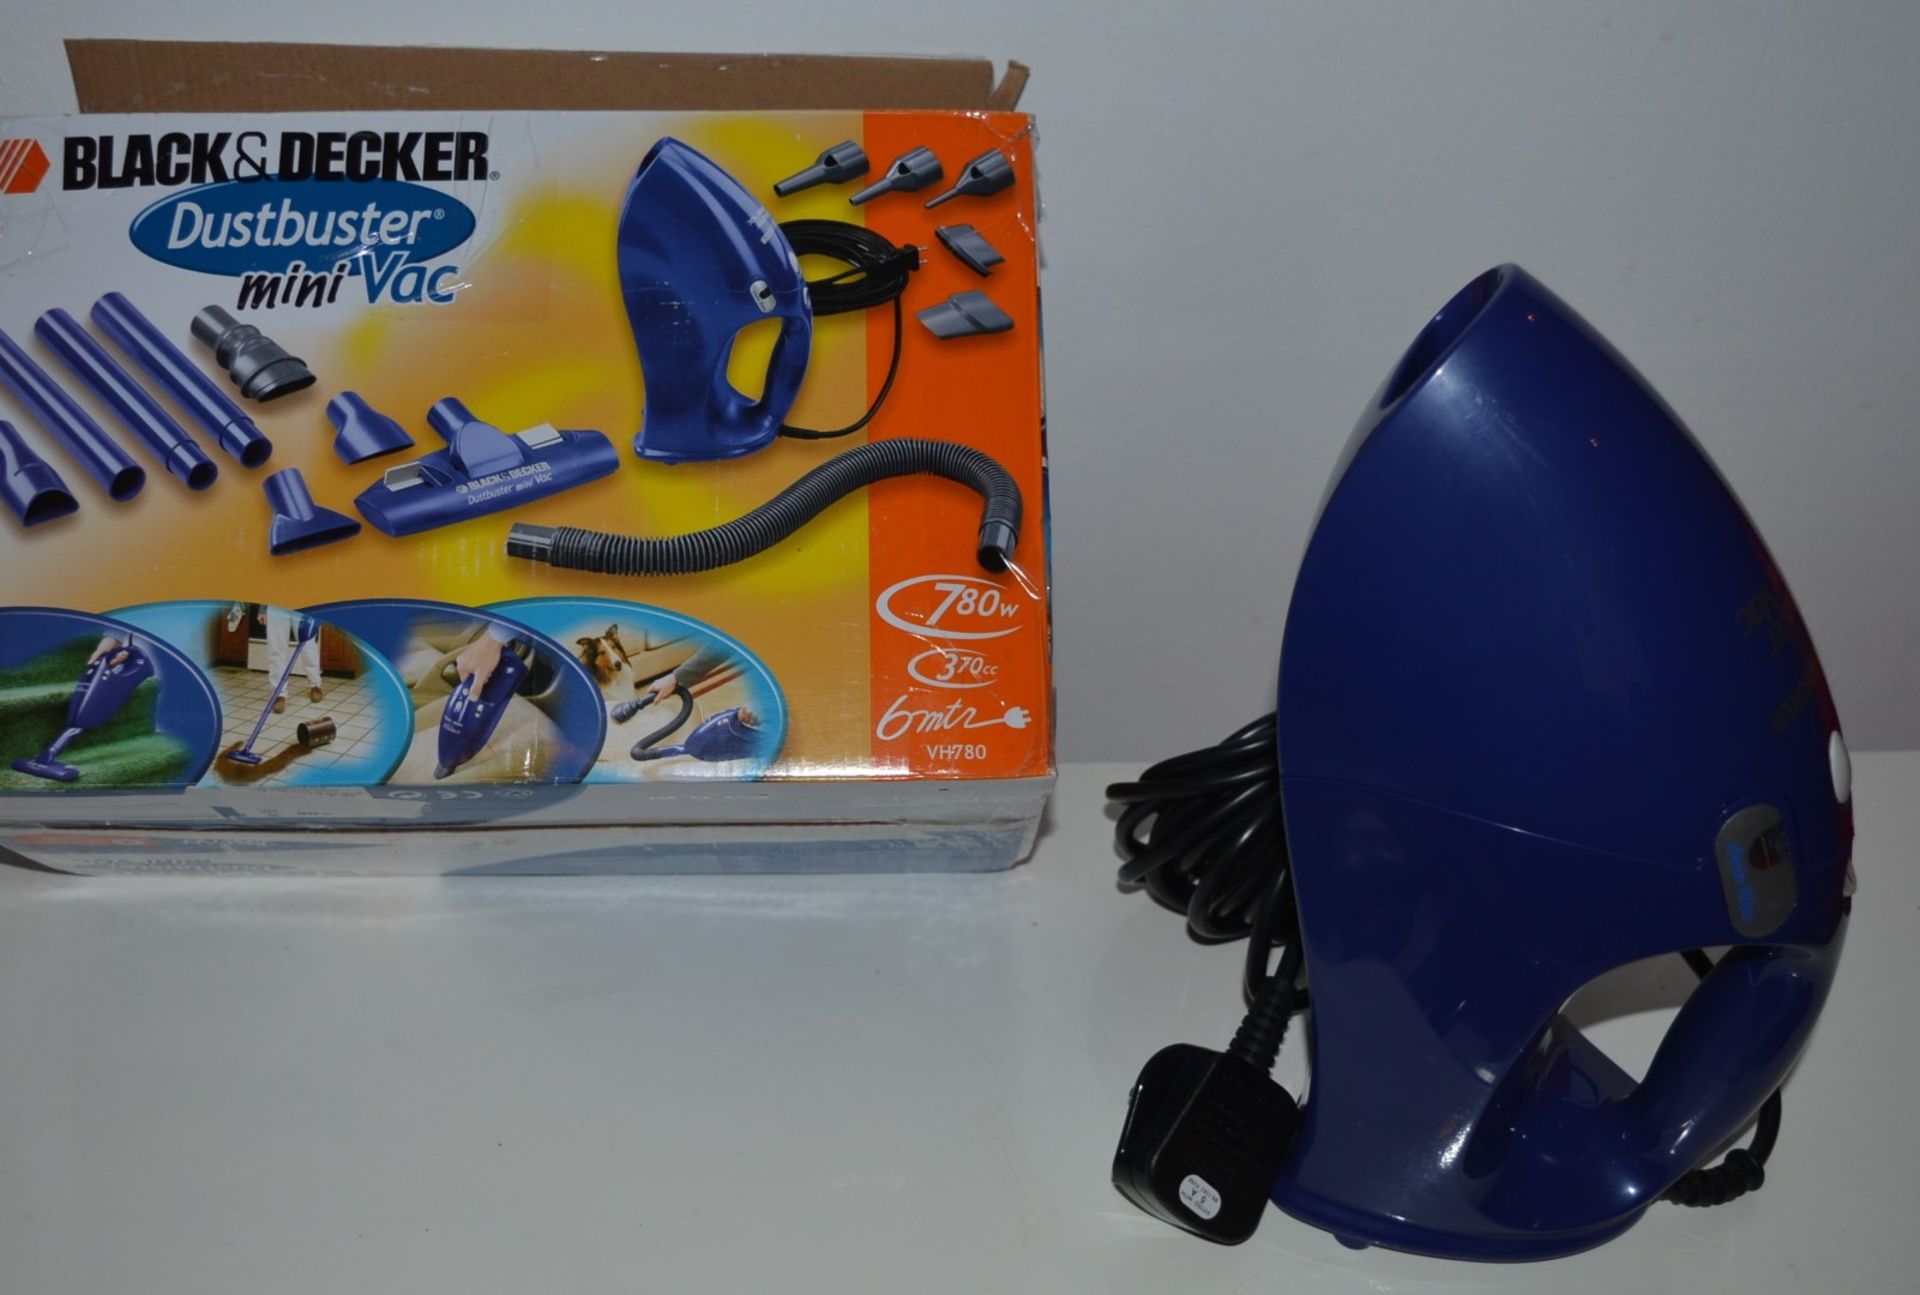 1 x Black & Decker Mini Vac With Accessories - Very Good Condition - Good Working Order - CL010 - - Image 3 of 5